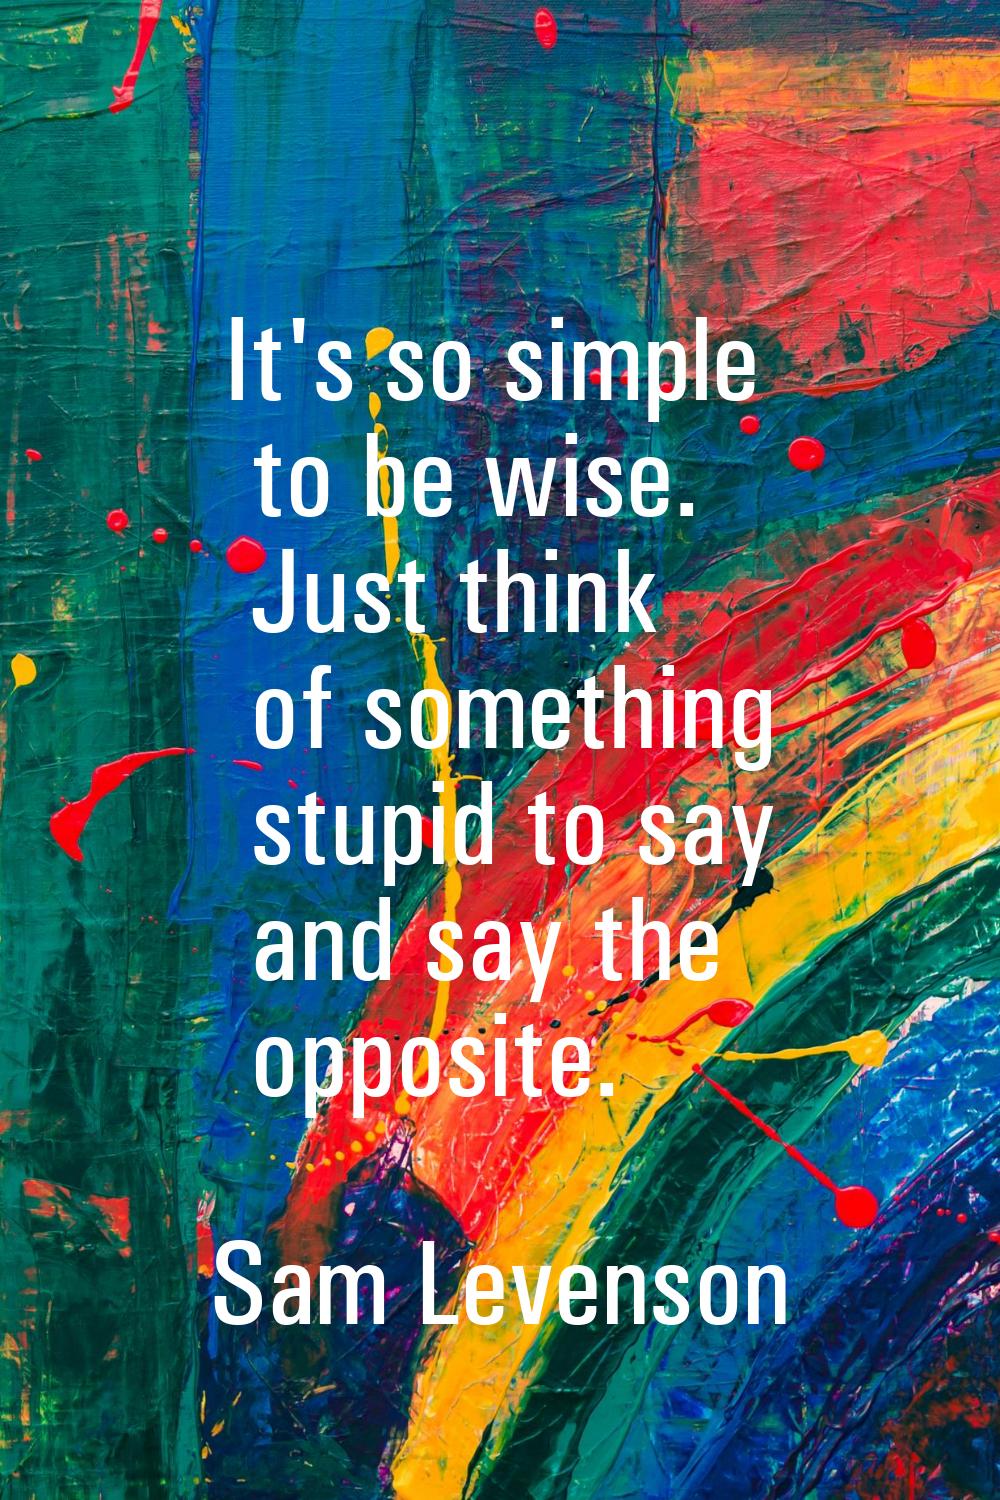 It's so simple to be wise. Just think of something stupid to say and say the opposite.